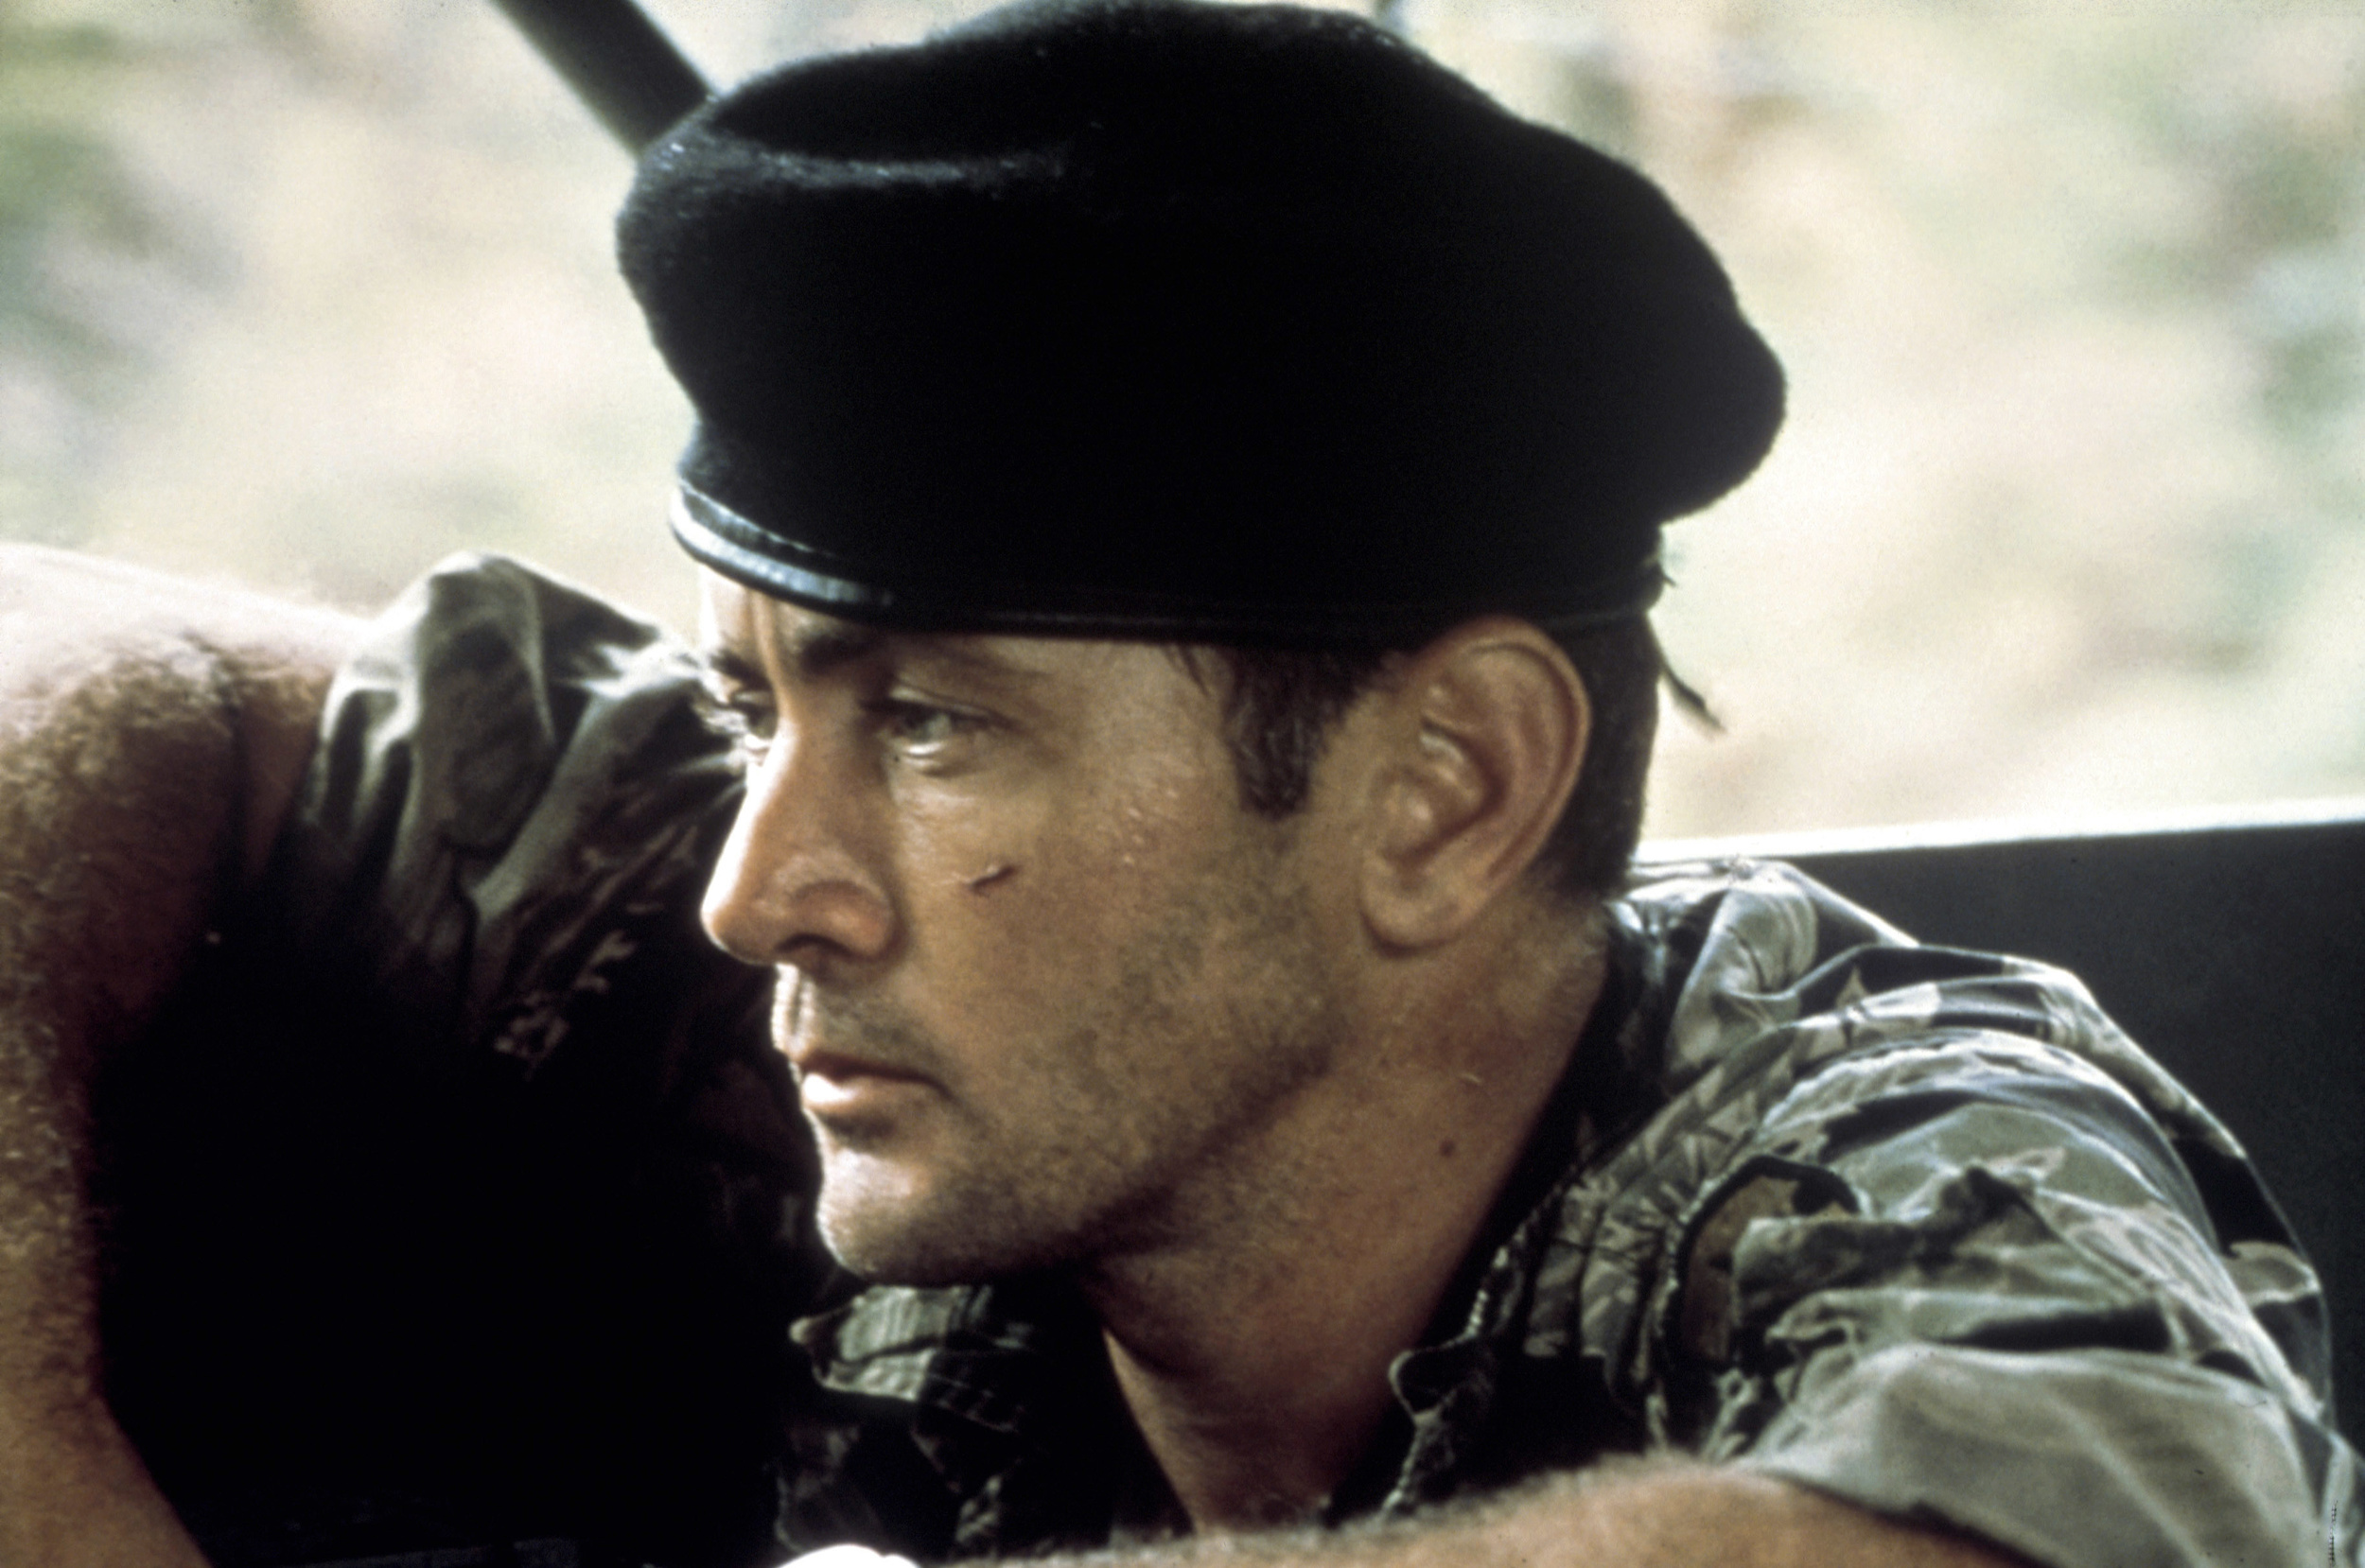 <p>Francis Ford Coppola’s war epic is full of memorable moments and iconic lines, which is probably a relief to him, given that the film almost killed him. That includes the opening of the film, when a distraught Captain Willard laments, “Saigon. Shıt. I’m still only in Saigon.”</p><p>You may also like: <a href='https://www.yardbarker.com/entertainment/articles/20_comedy_films_that_are_so_bad_theyre_good_100323/s1__39121885'>20 comedy films that are so bad they’re good</a></p>